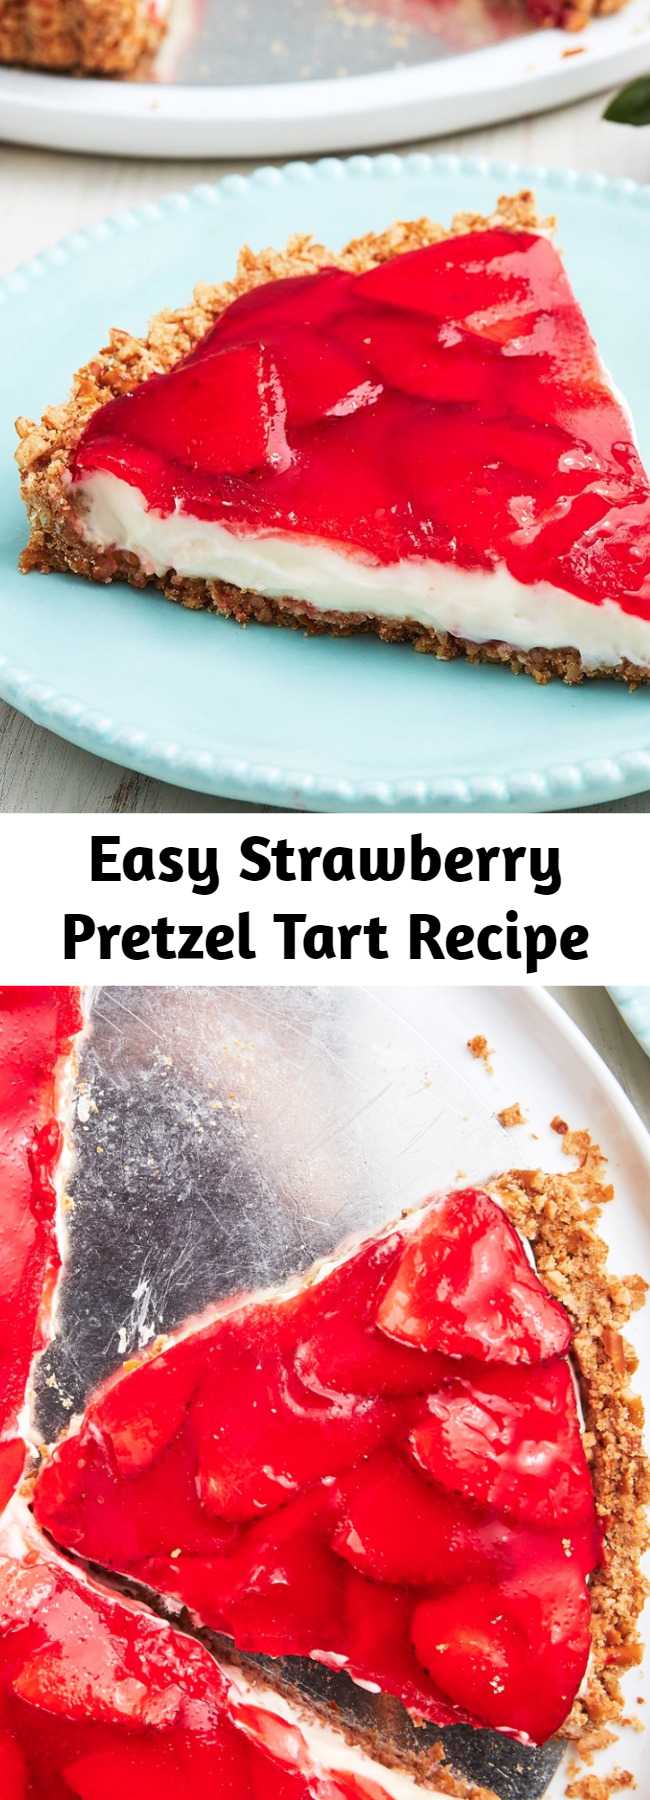 Easy Strawberry Pretzel Tart Recipe - Looking for an easy summer dessert recipe? This Strawberry Pretzel Dessert, also known as Strawberry Pretzel Salad, is the perfect one! A little sweet, a little savory—we're obsessed. Our Strawberry Pretzel Tart is the most bizarrely delicious salty-sweet dessert.